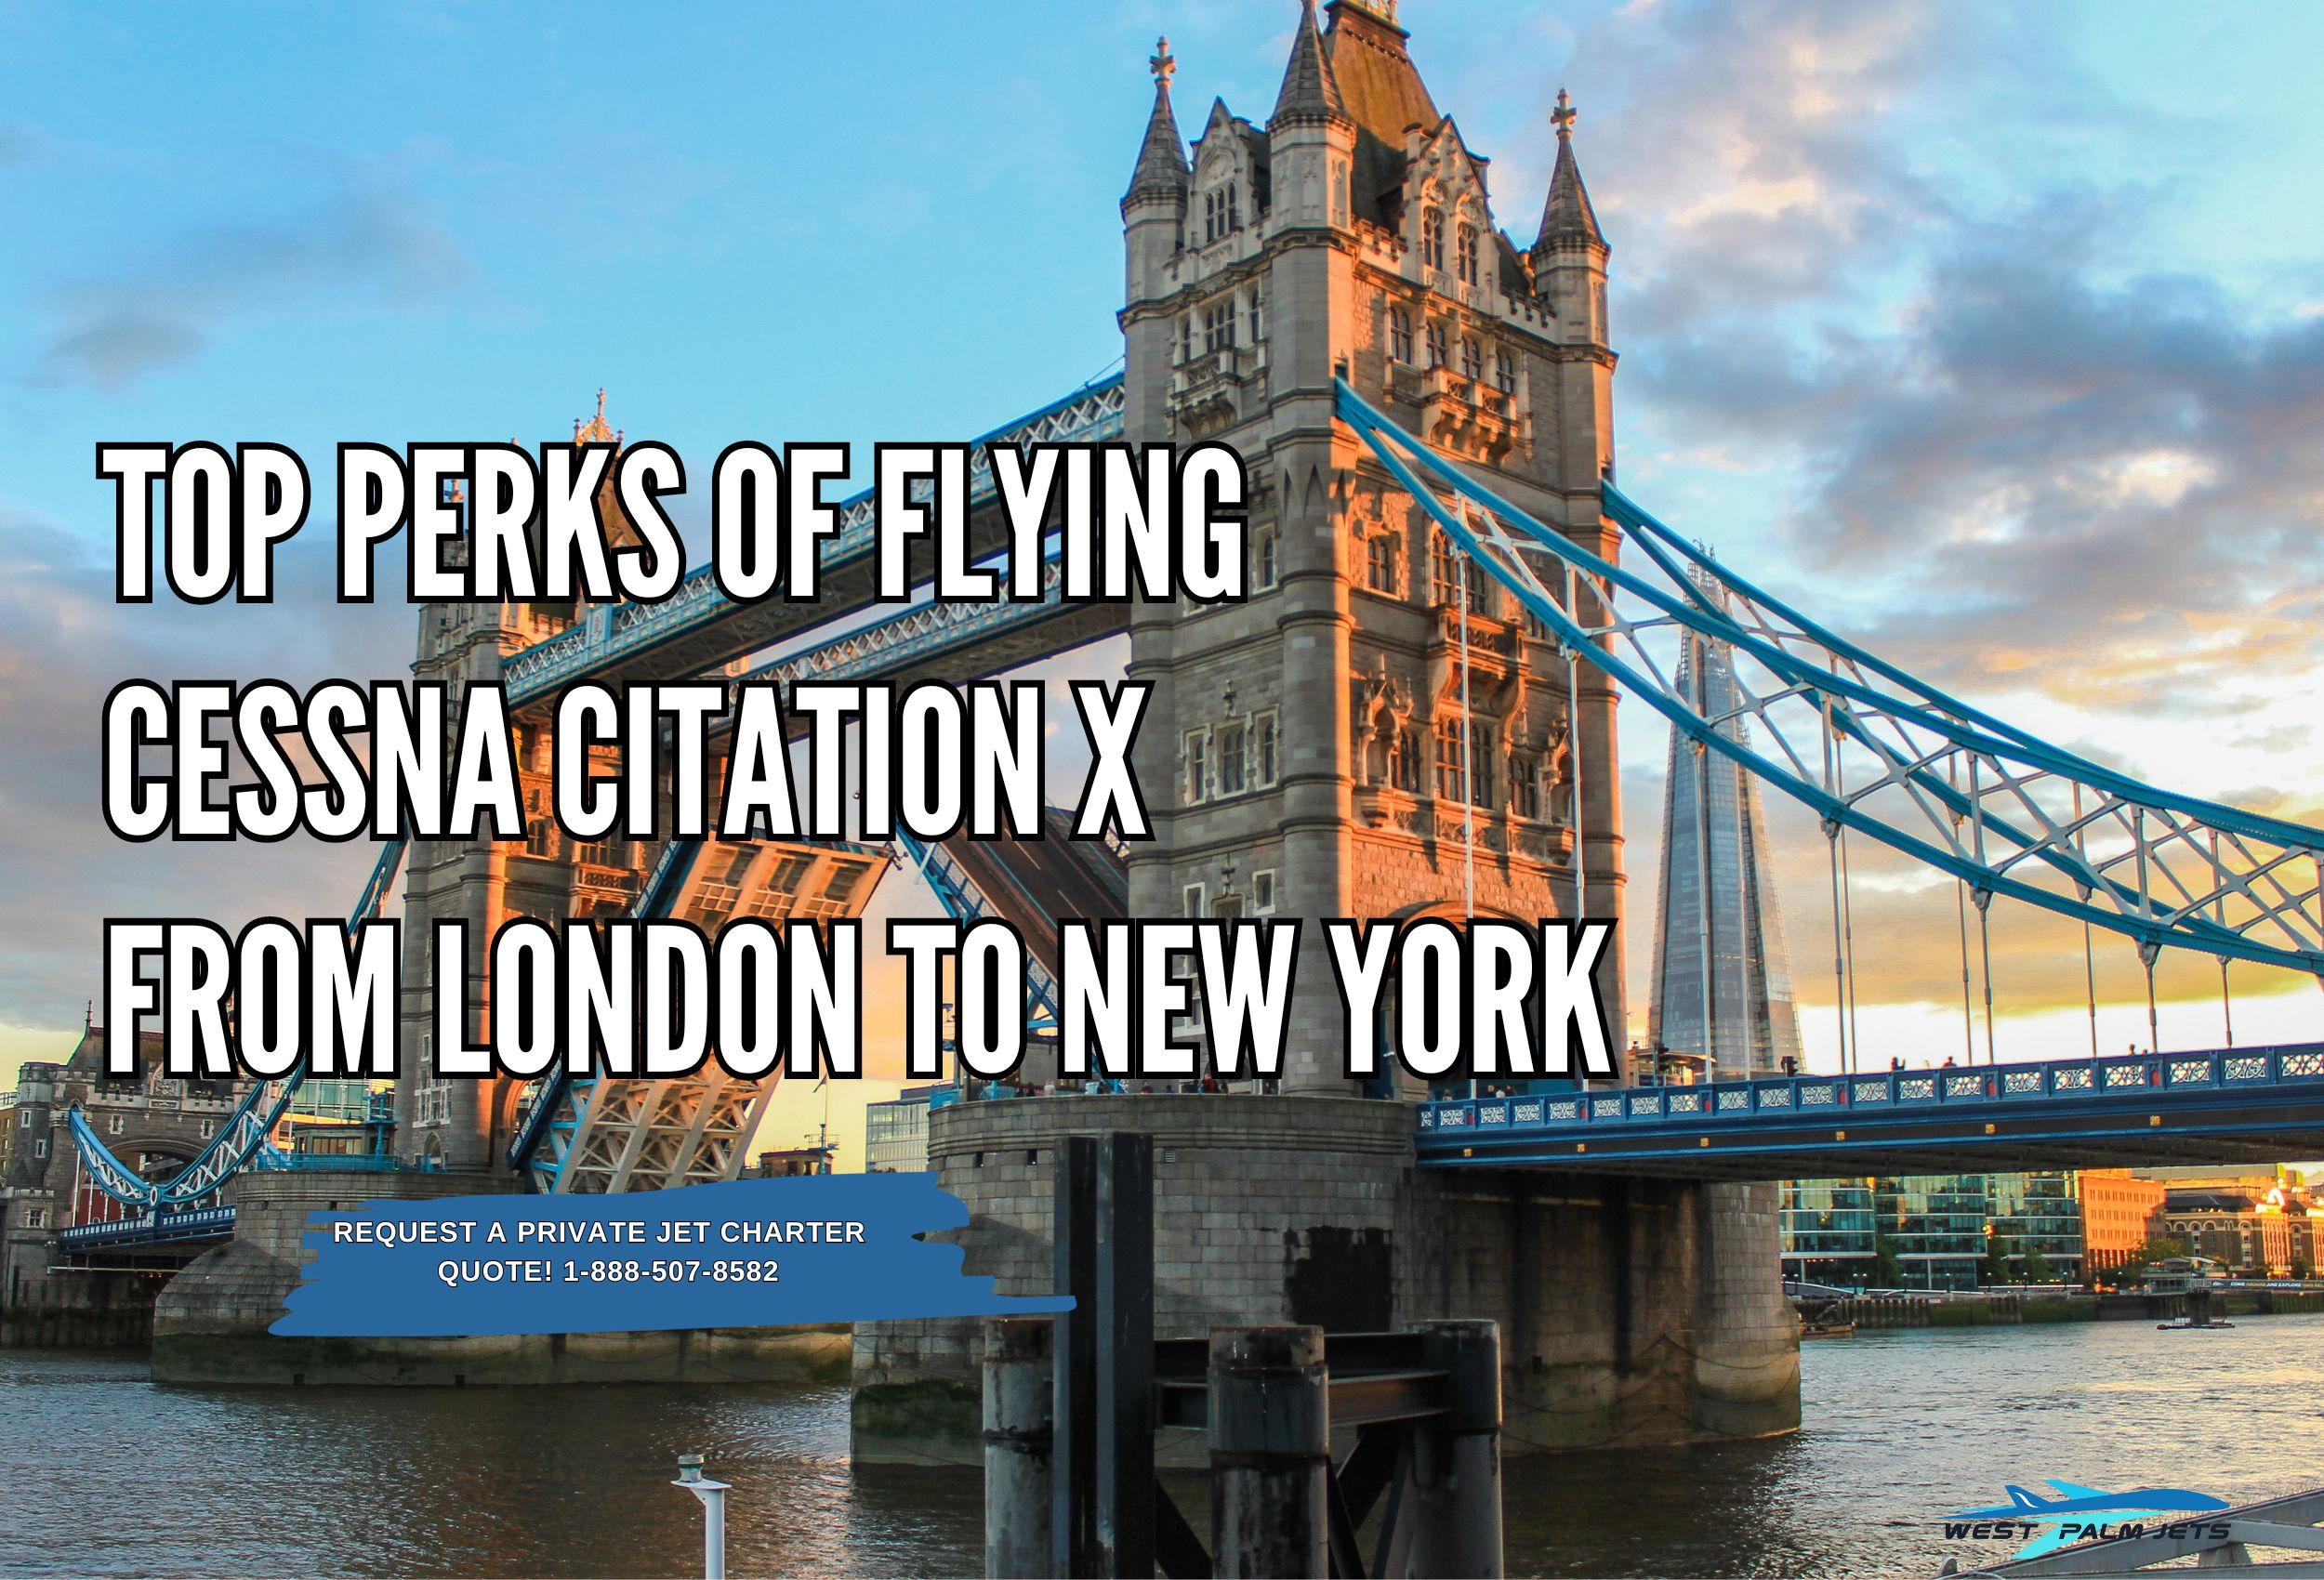 Top Perks of Flying Cessna Citation X from London to New York